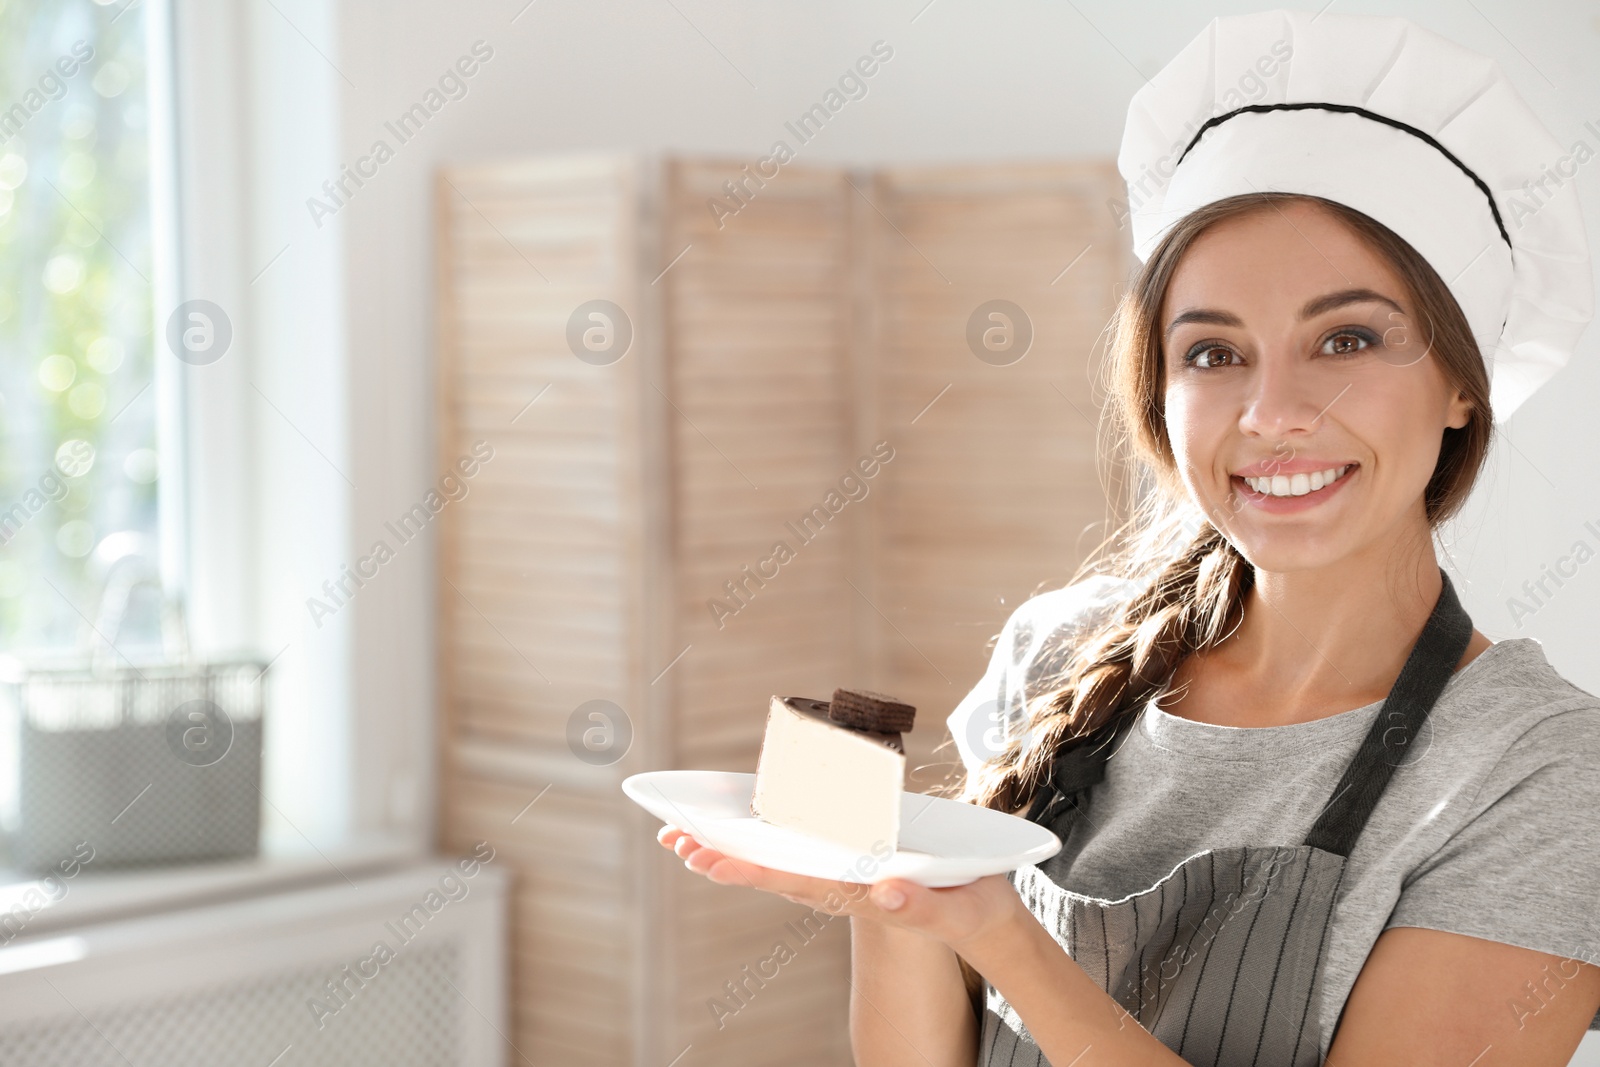 Photo of Professional female chef with plate of delicious dessert in kitchen